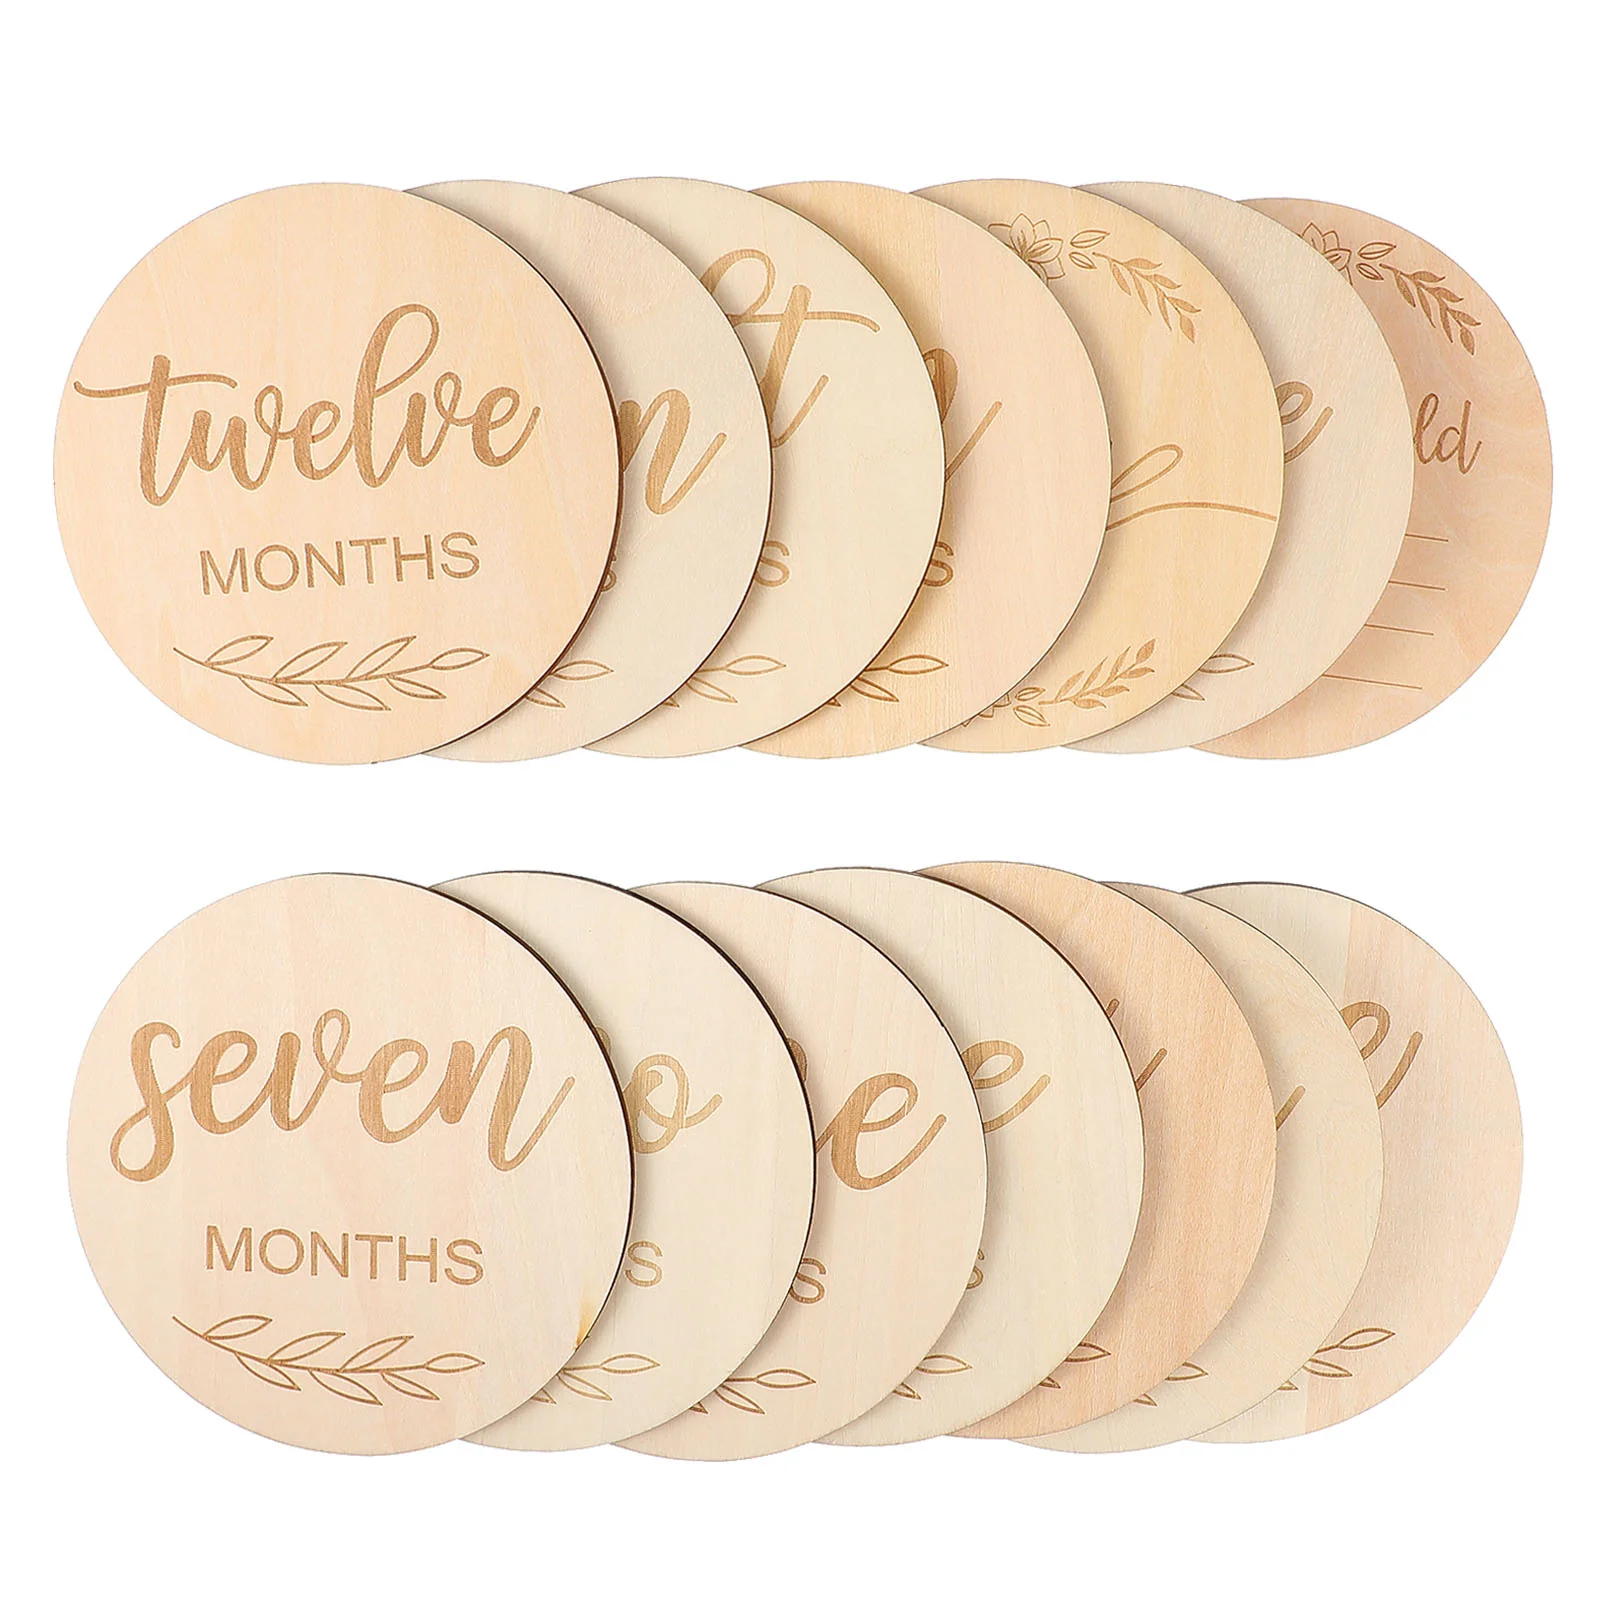 

Photograph Wood Chips Customizable Discs Baby Monthly Circles Wooden Cards Milestone Newborn Props